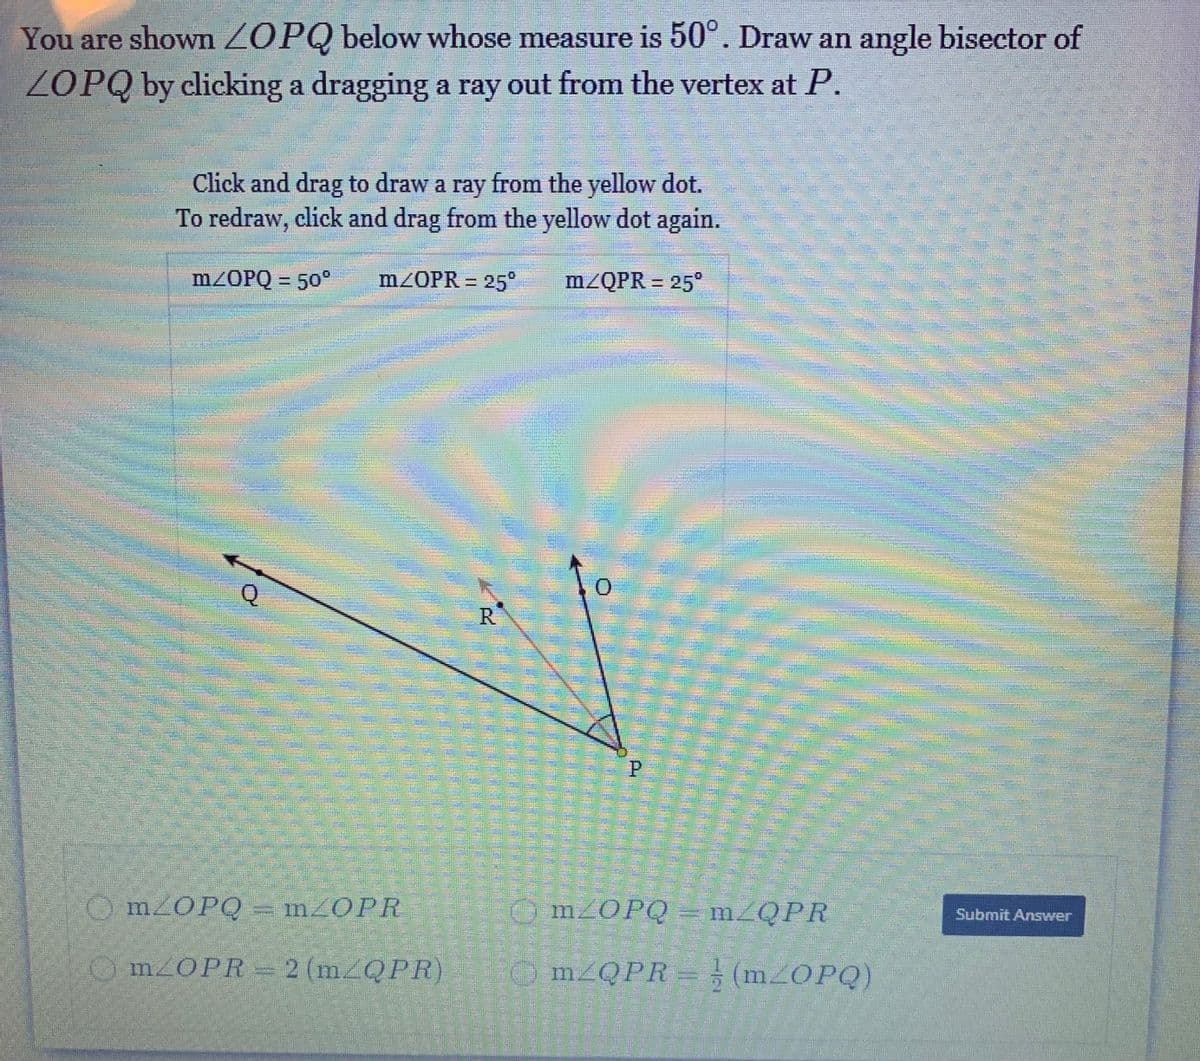 You are shown ZOPQ below whose measure is 50°. Draw an angle bisector of
ZOPQ by clicking a dragging a ray out from the vertex at P.
Click and drag to draw a ray from the yellow dot.
To redraw, click and drag from the yellow dot again.
M/OPQ = 50°
m/OPR = 25°
m/QPR = 25°
R.
O MZOPQ = m_OPR
O M2OPQ = m_QPR
Submit Answer
O M2OPR= 2 (m QPR)
O M2QPR = (M2OPQ)
